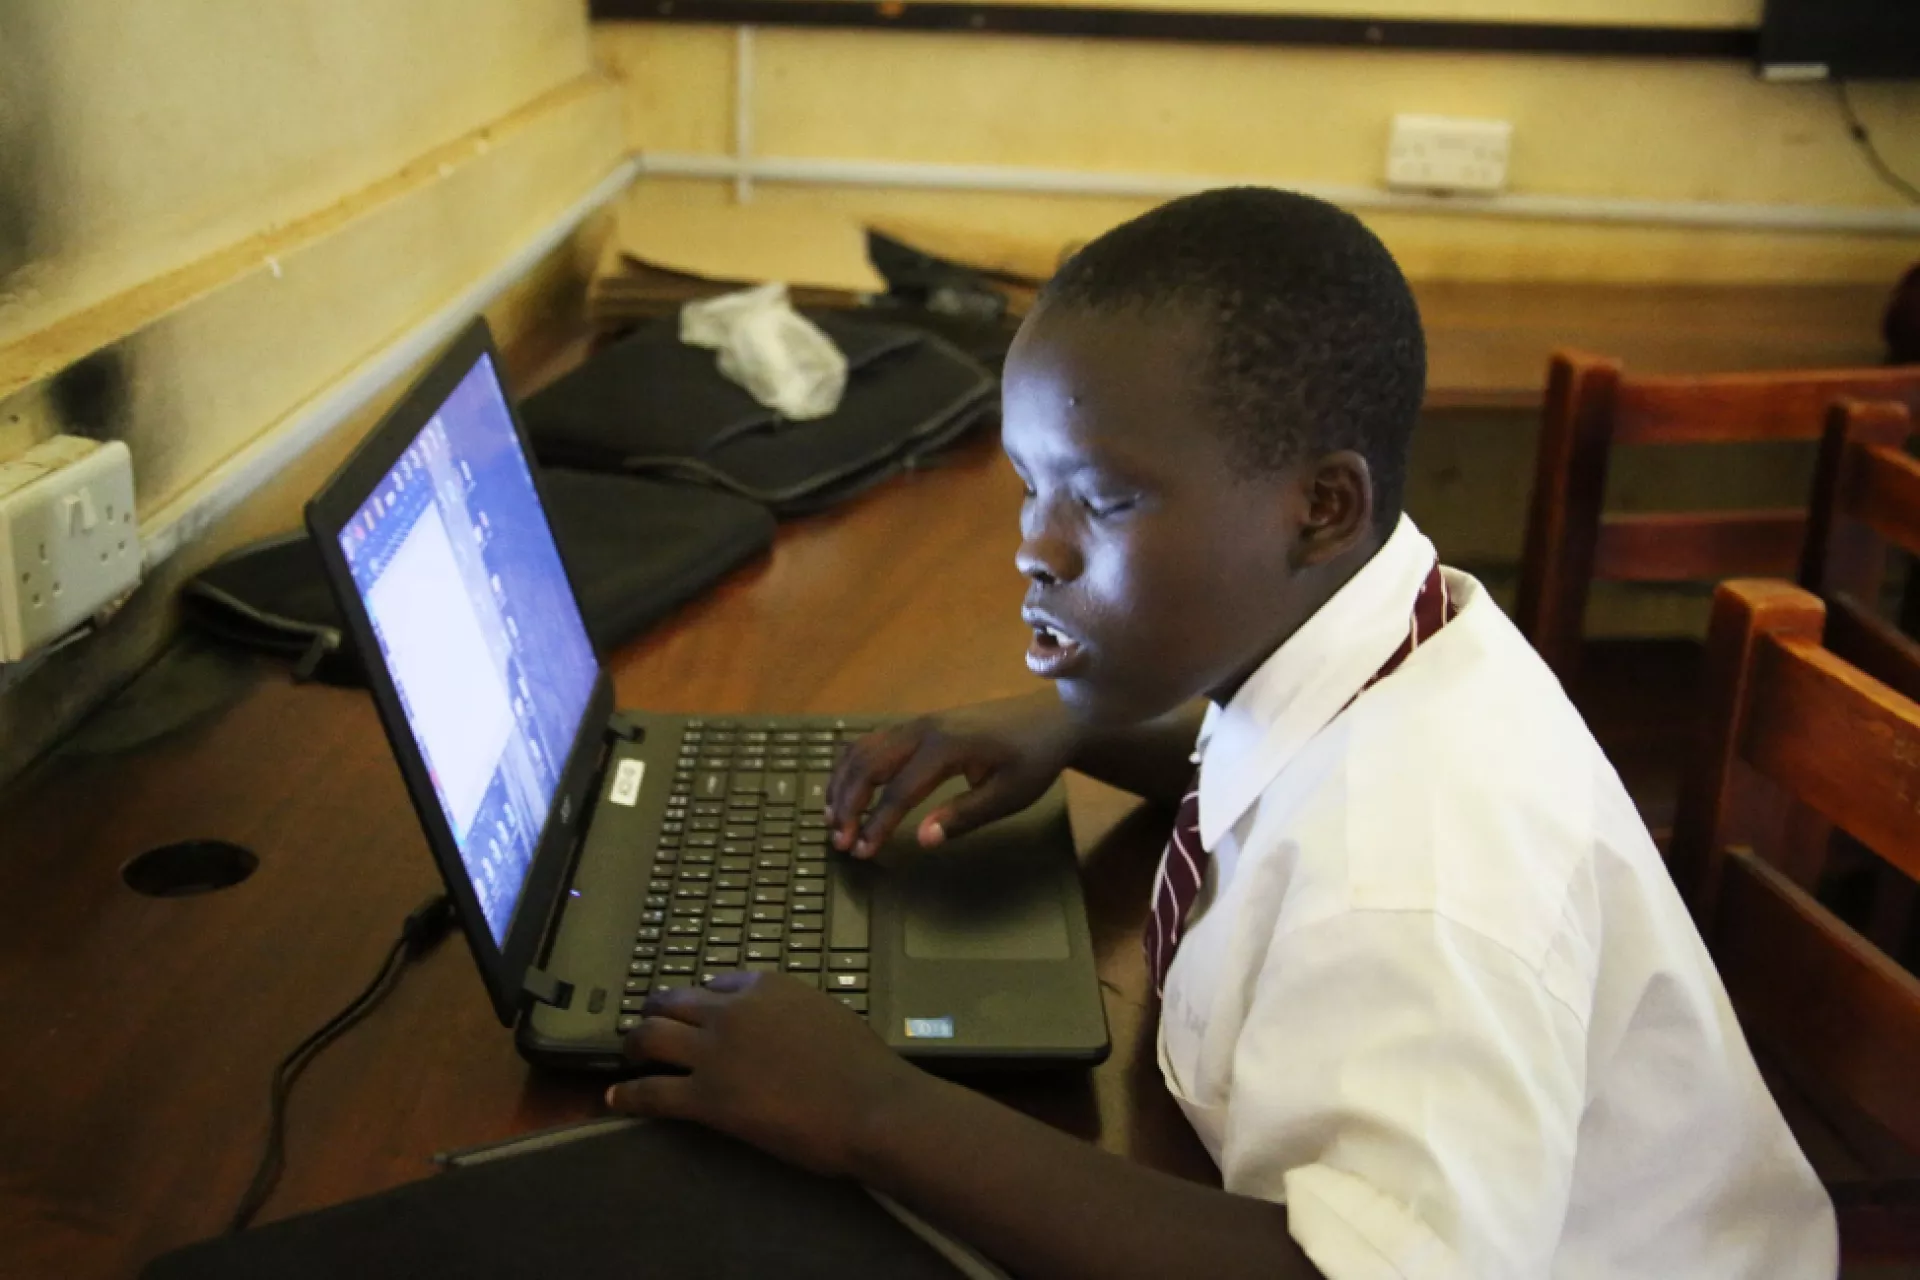 George Ntakimanye a 14-year old visually impaired student uses a laptop computer.